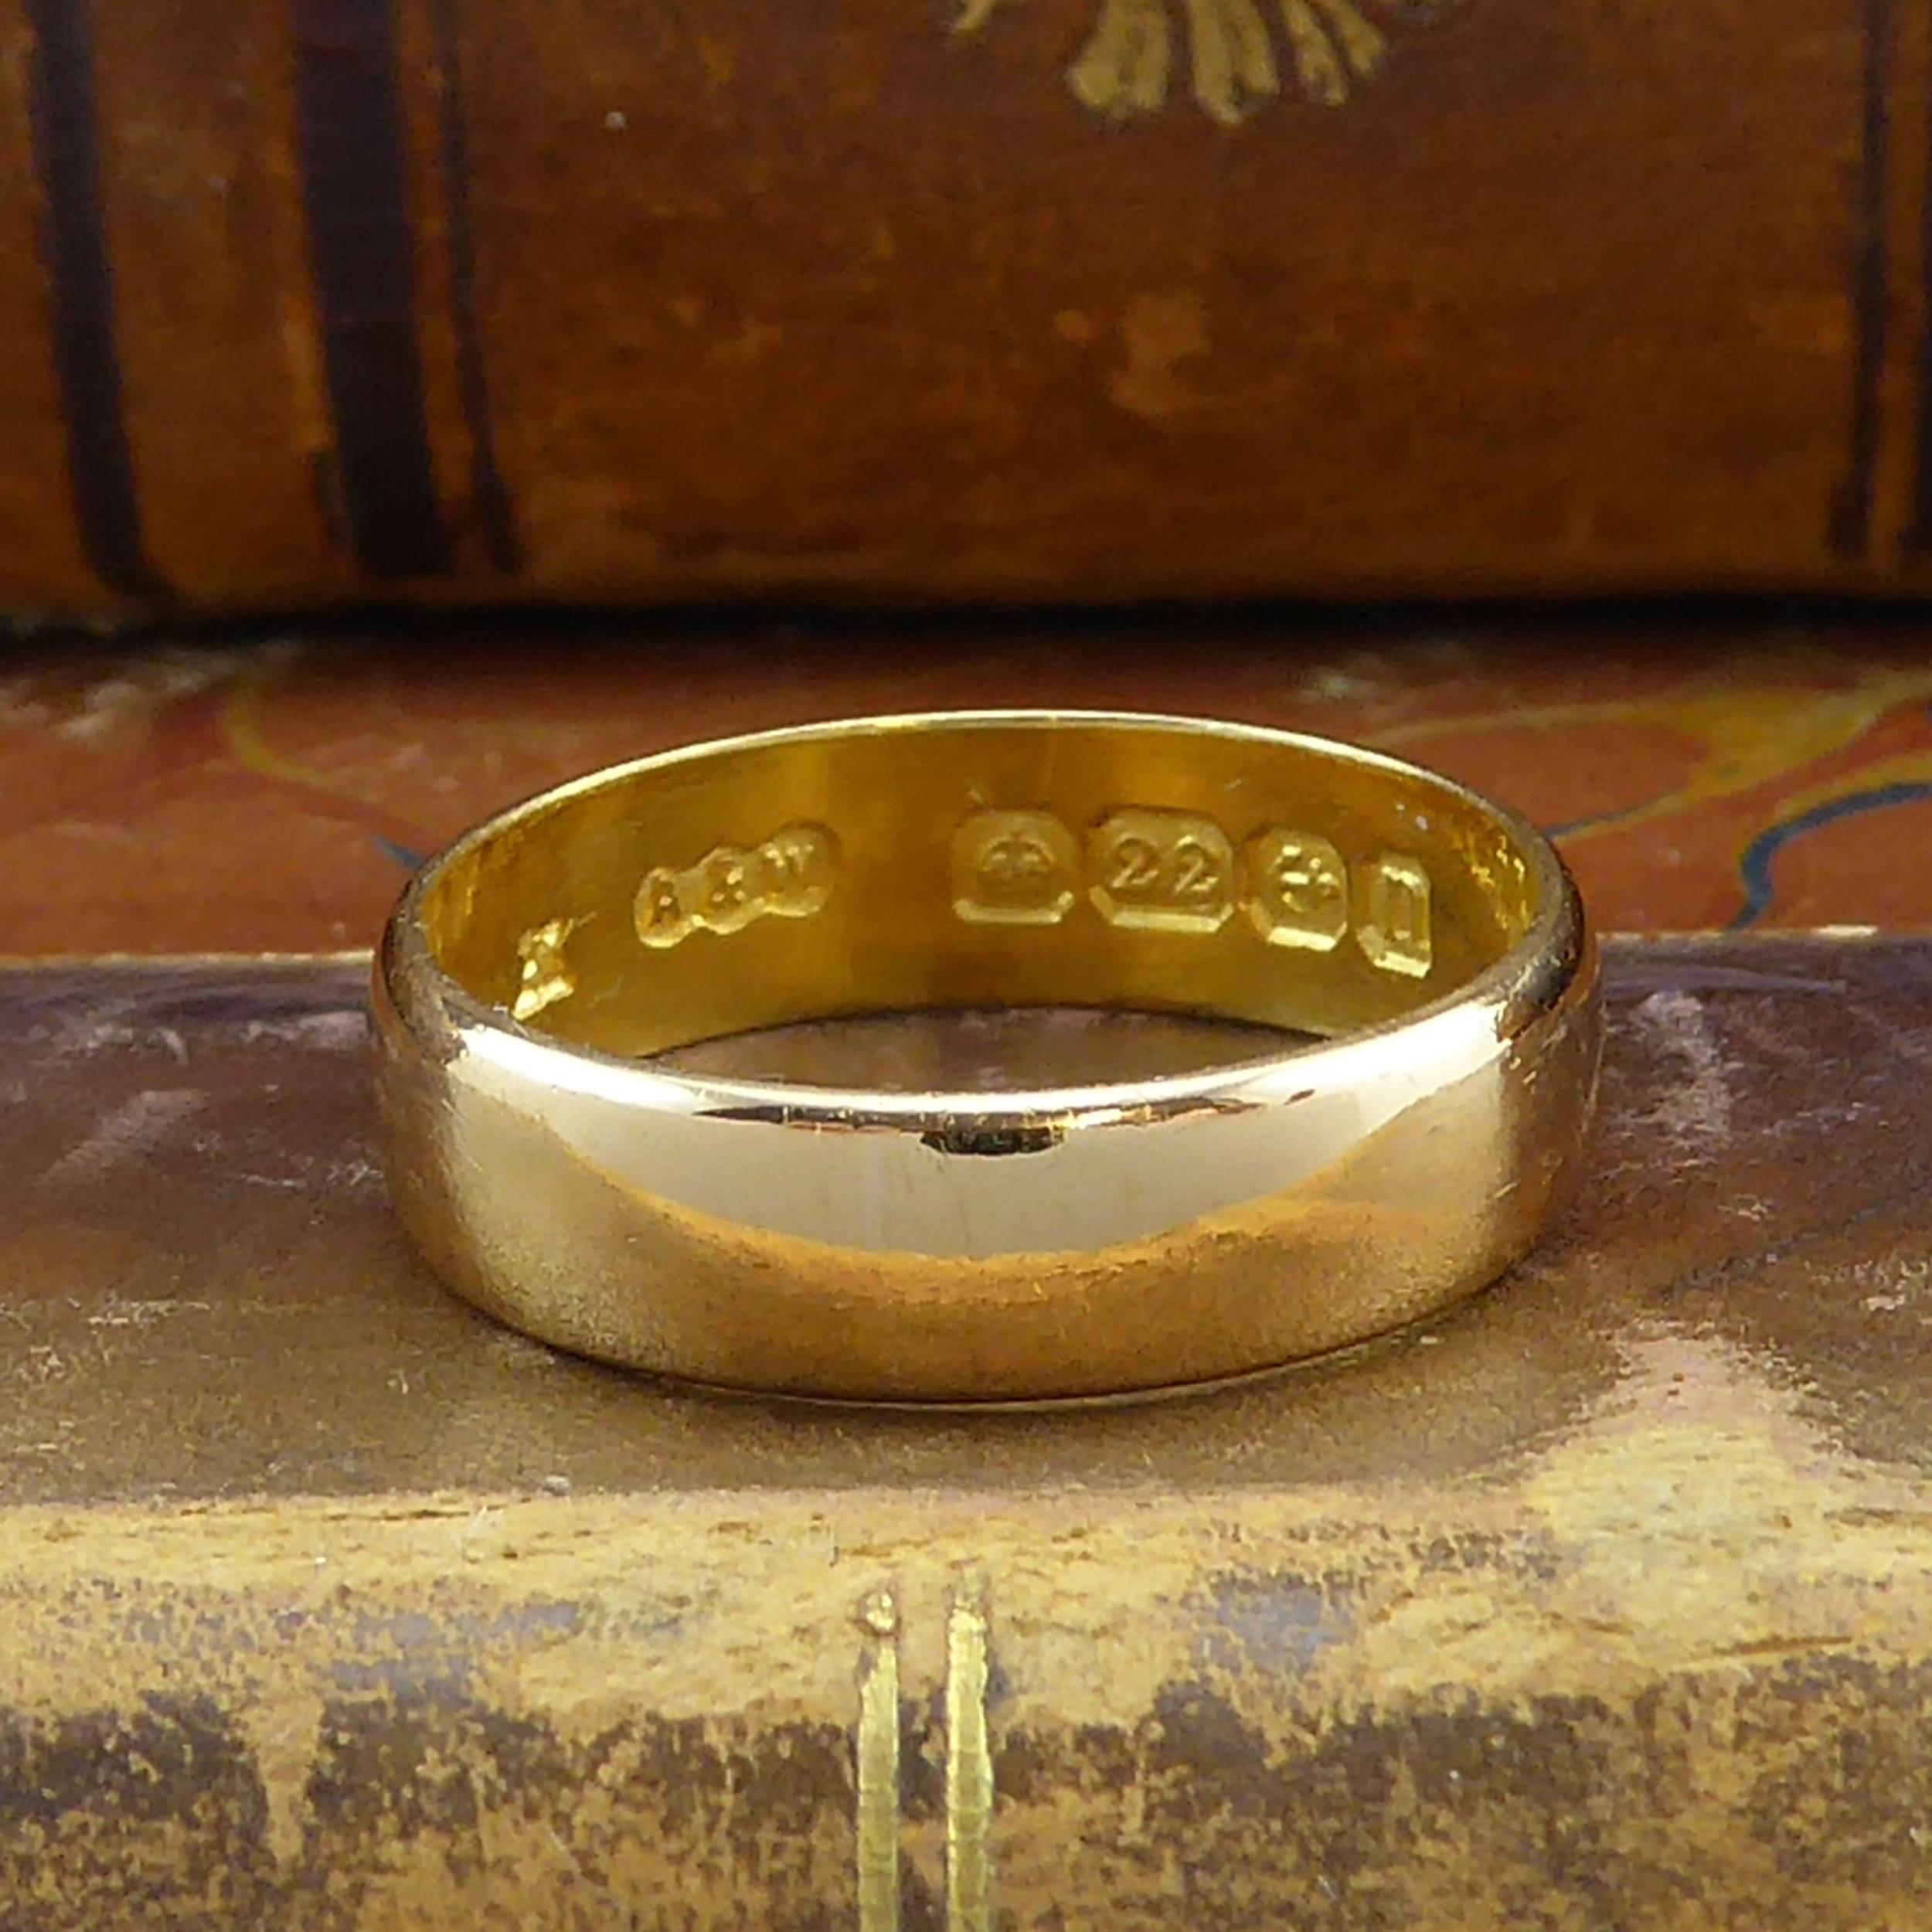 Such lovely antique wedding ring with a low D shaped cross section and with a plain polished finish that may be left as is with the patina of 100 years or polished to a box-fresh finish.

The inside of the band shows the hallmarked 22 carat gold